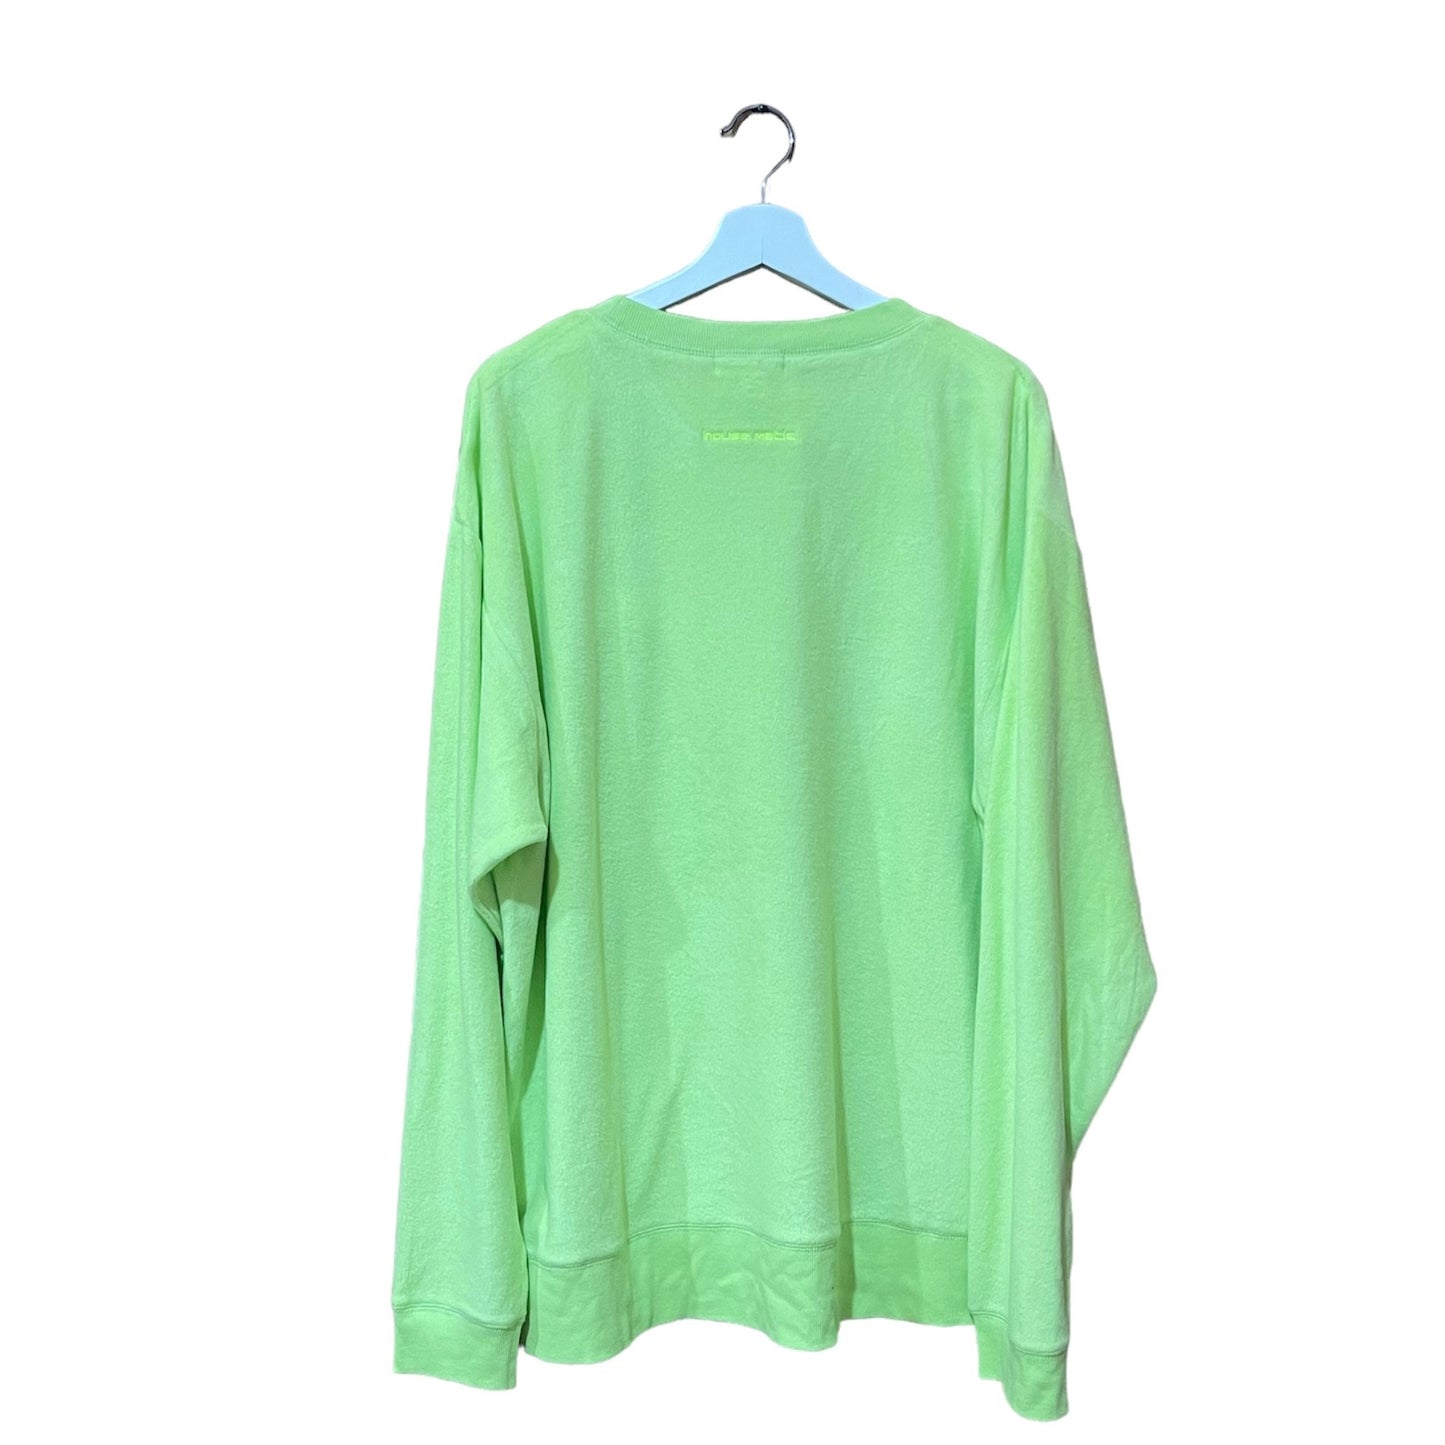 Housematic Exclusive Lime sweater